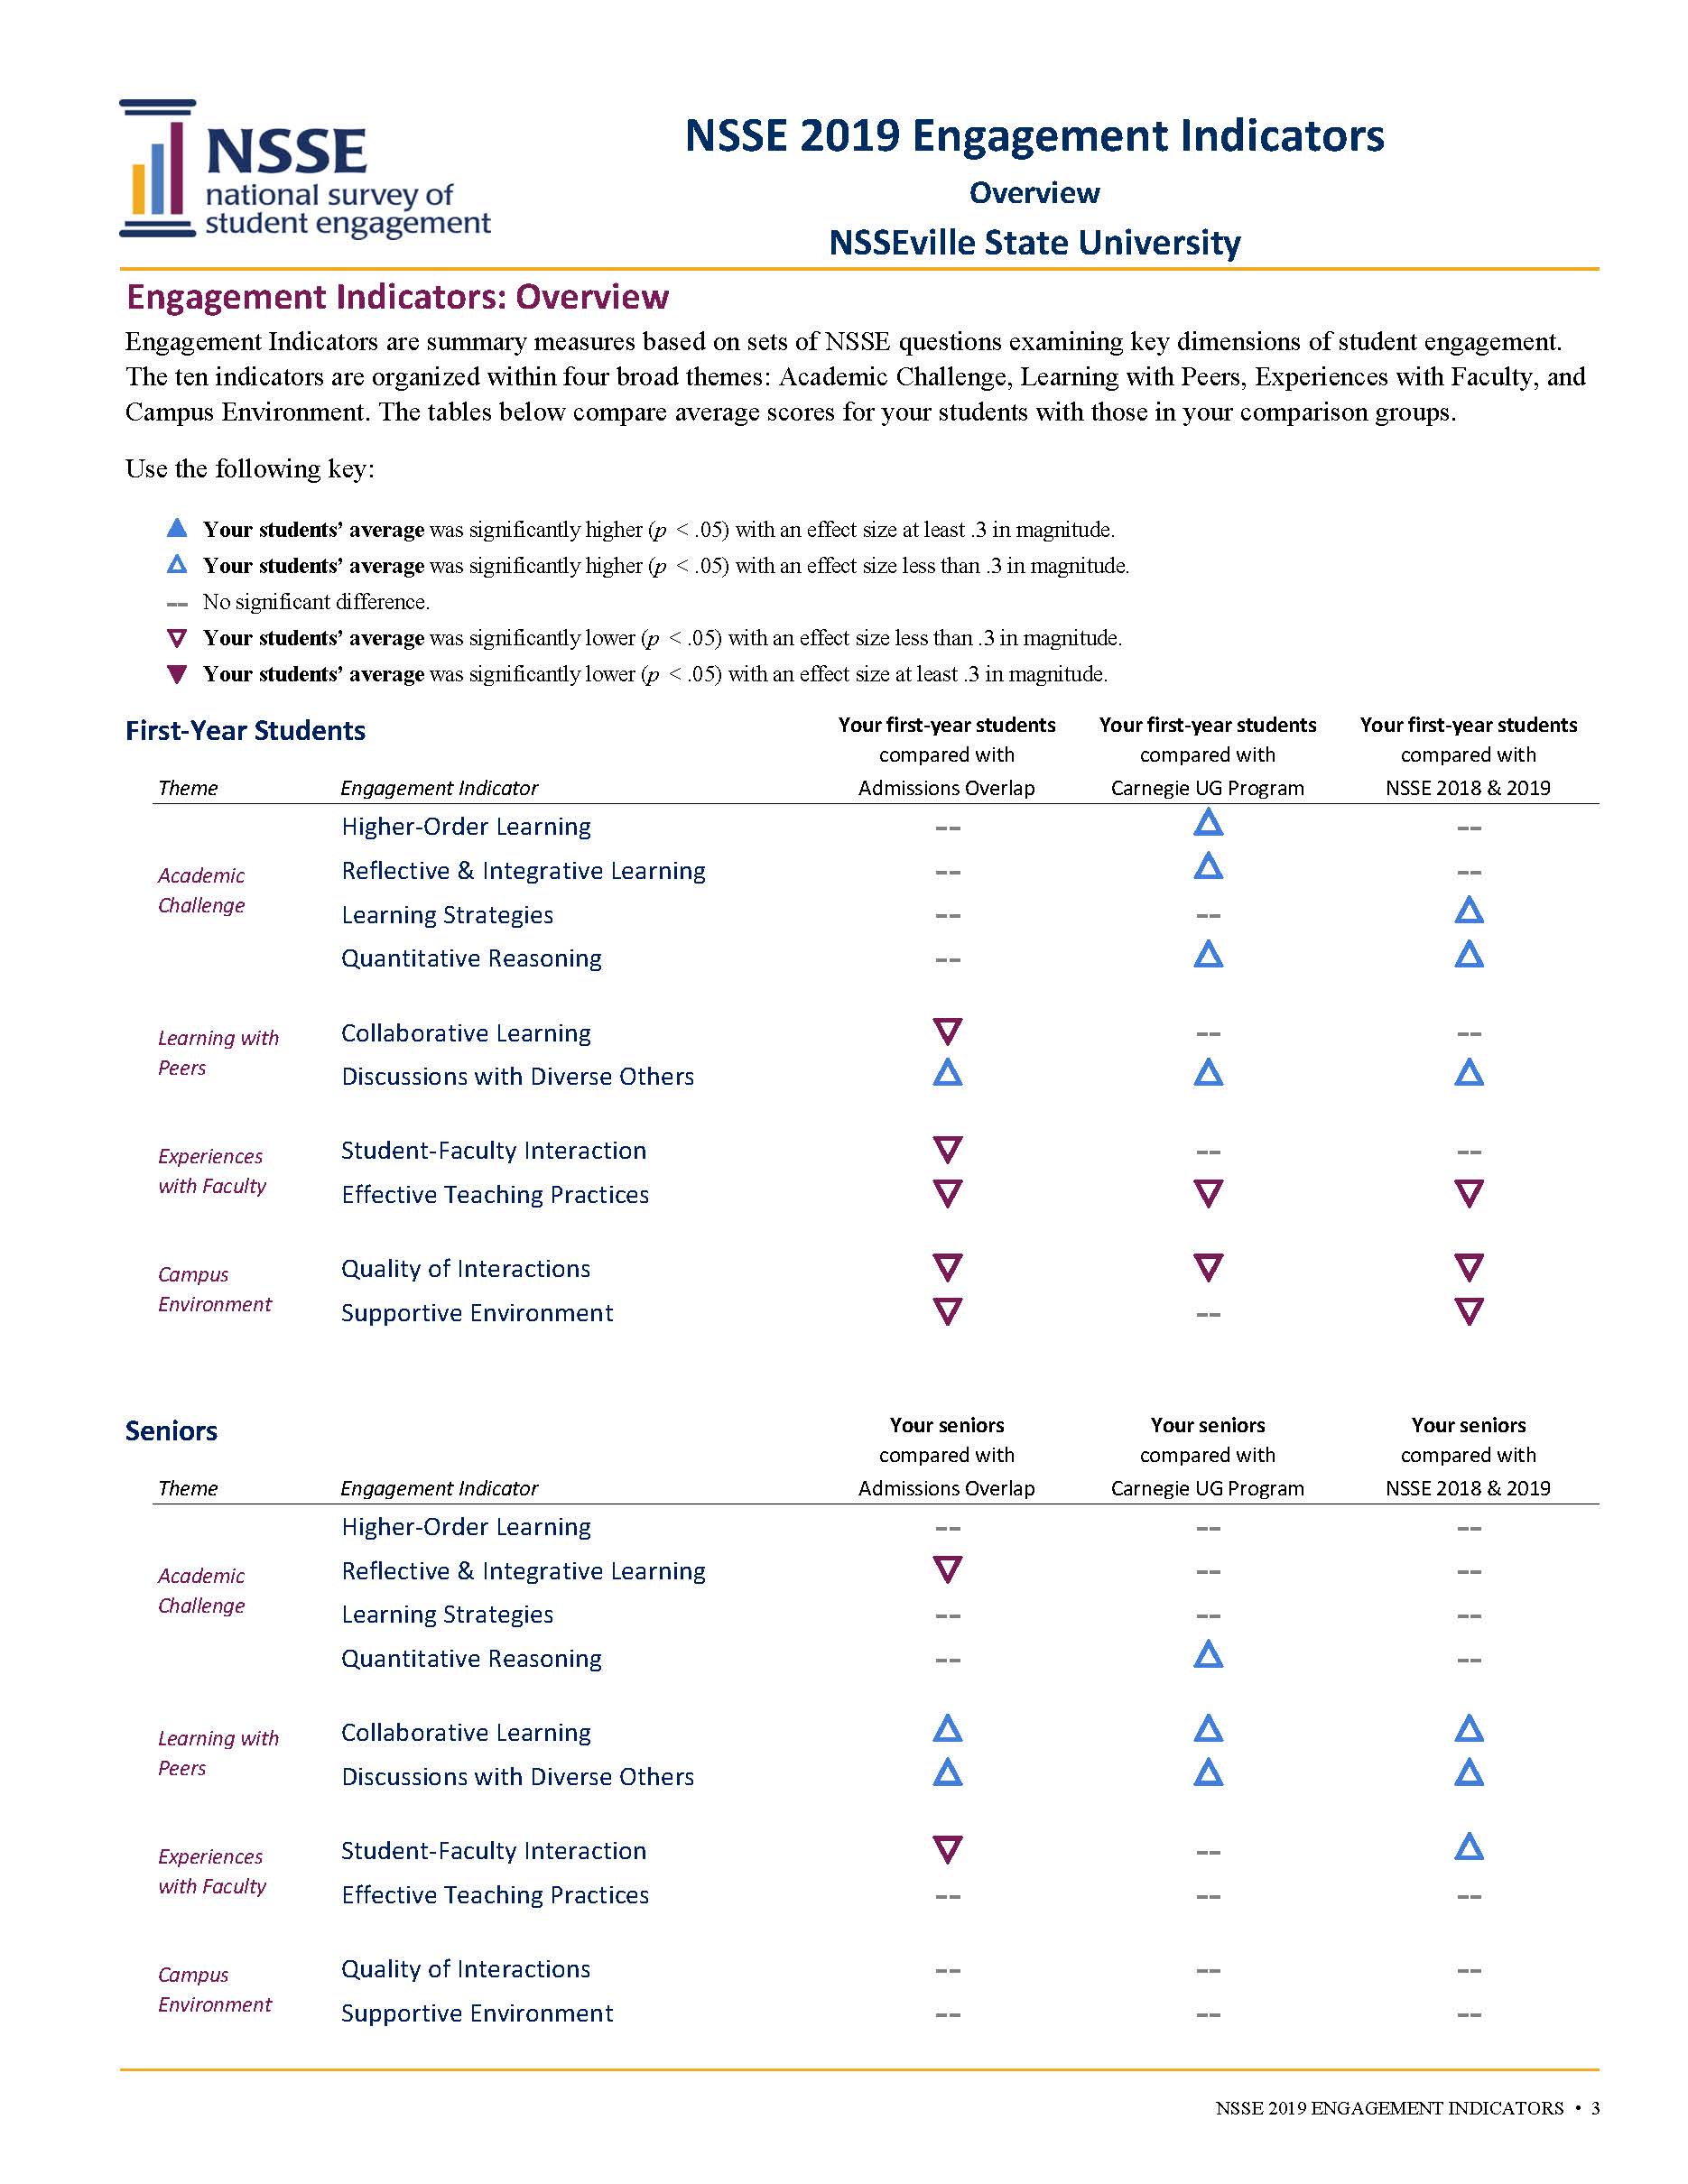 Sample Report: page 3 of NSSE Engagement Indicators